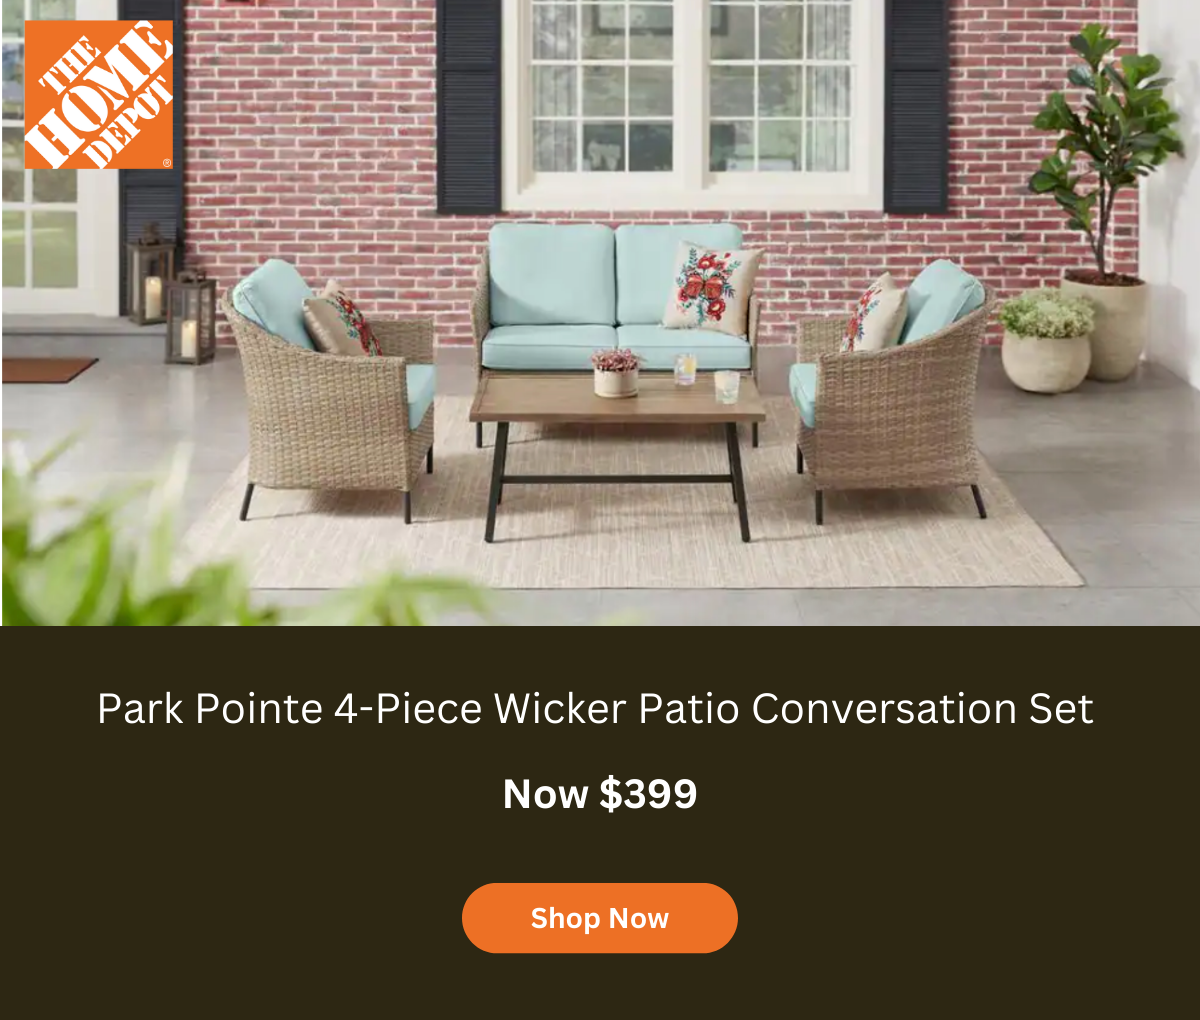 The Home Depot | Park Pointe 4-Piece Wicker Patio Set for $399